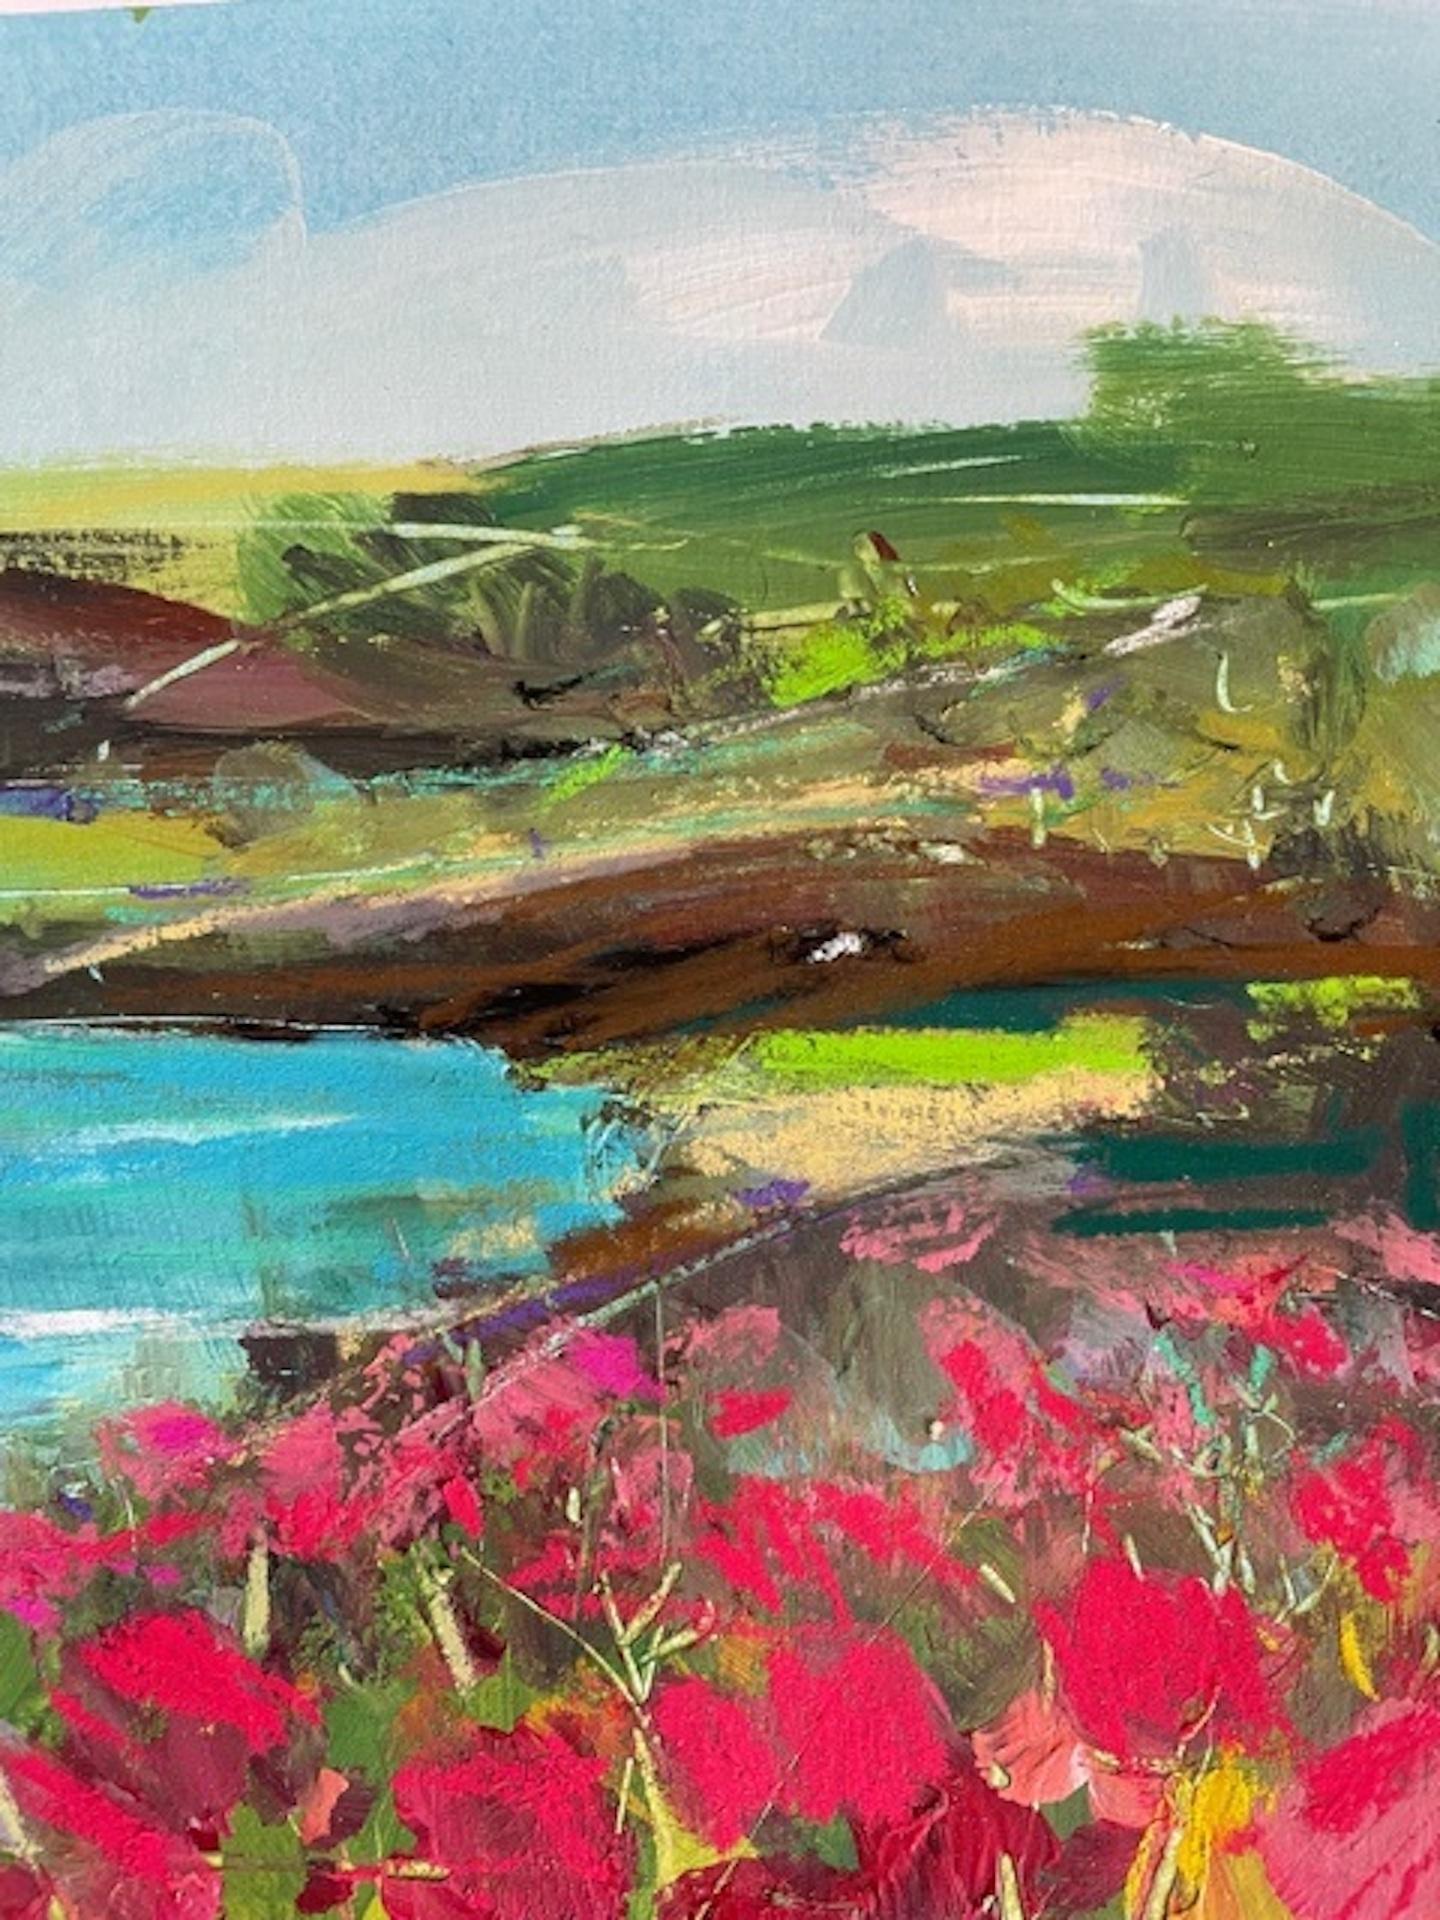 Poppies, Cornish Coast by Natalie Bird [2021]
Original
Mixed media
Image size: H:18 cm x W:23 cm
Complete Size of Unframed Work: H:25 cm x W:30 cm x D:1cm
Sold Unframed
Please note that insitu images are purely an indication of how a piece may